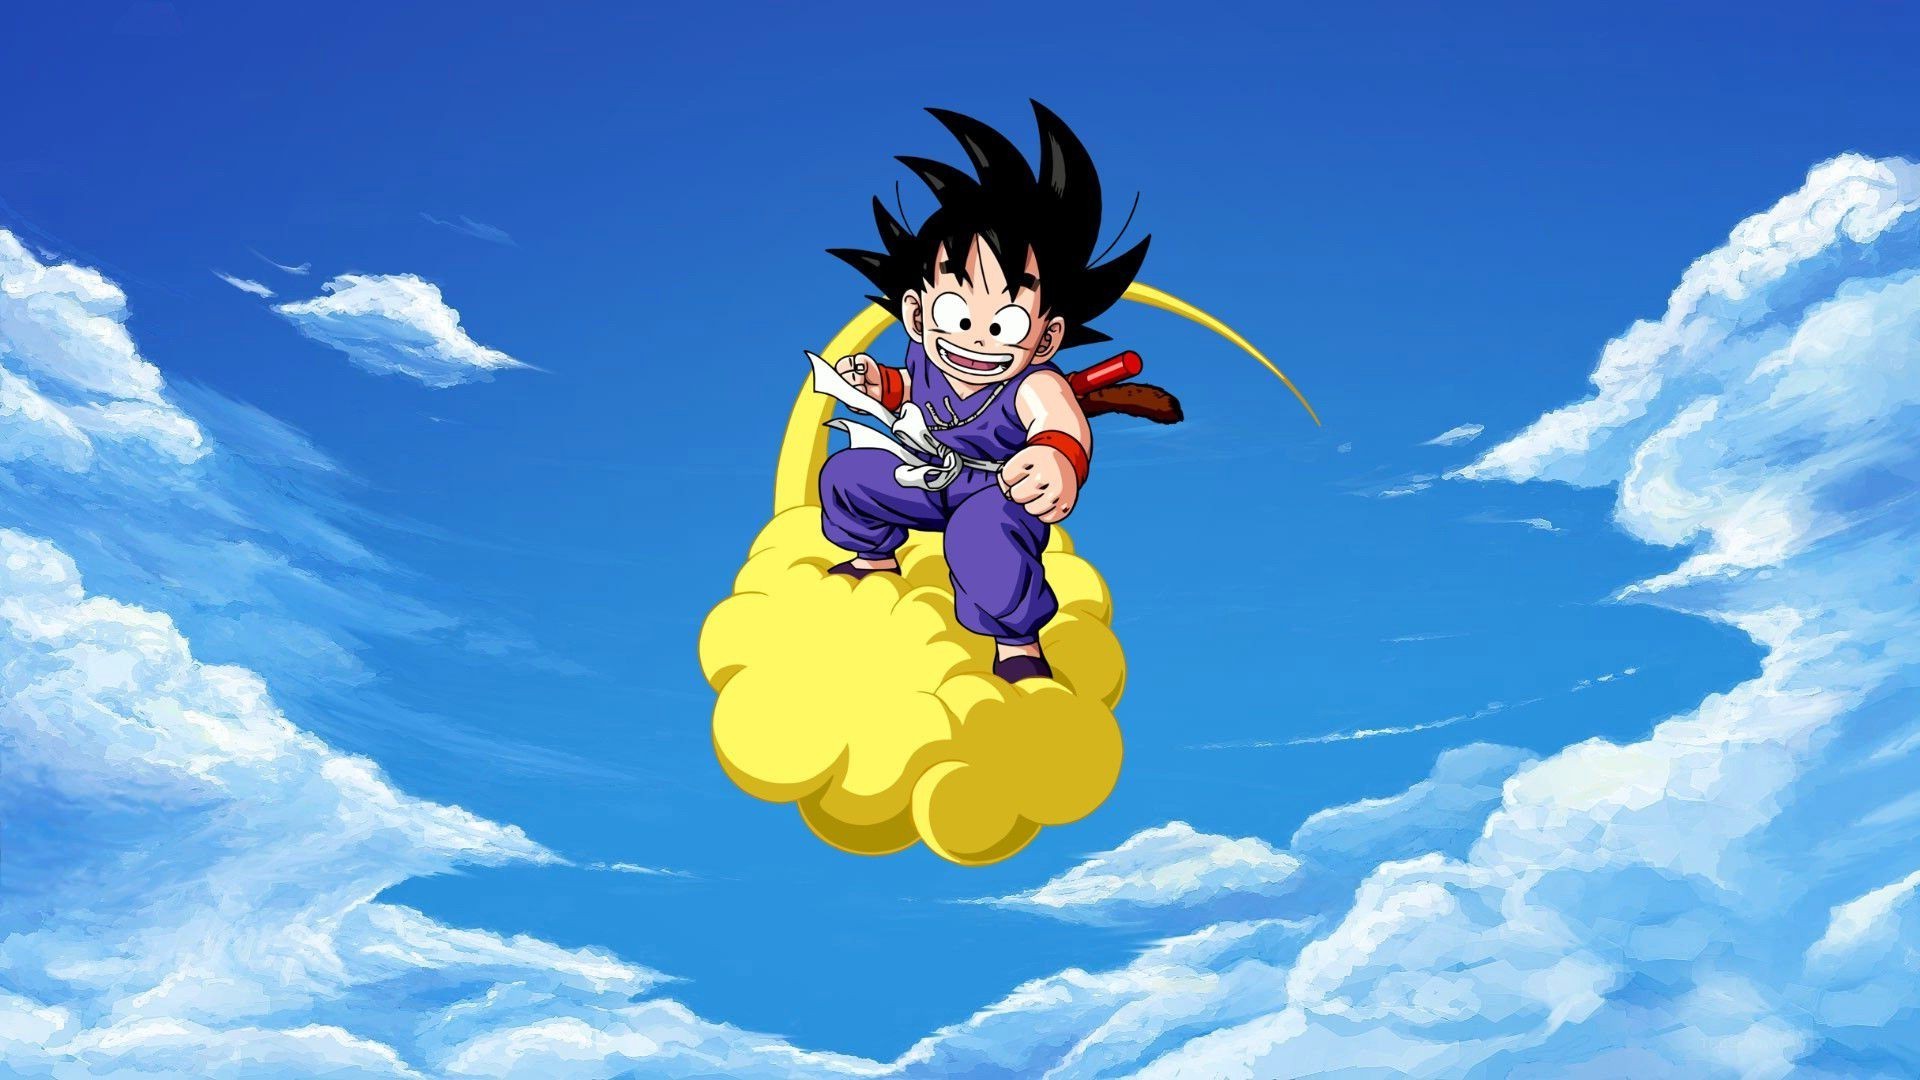 Wallpaper HD Kid Goku With Resolution 1920X1080 pixel. You can make this wallpaper for your Desktop Computer Backgrounds, Mac Wallpapers, Android Lock screen or iPhone Screensavers